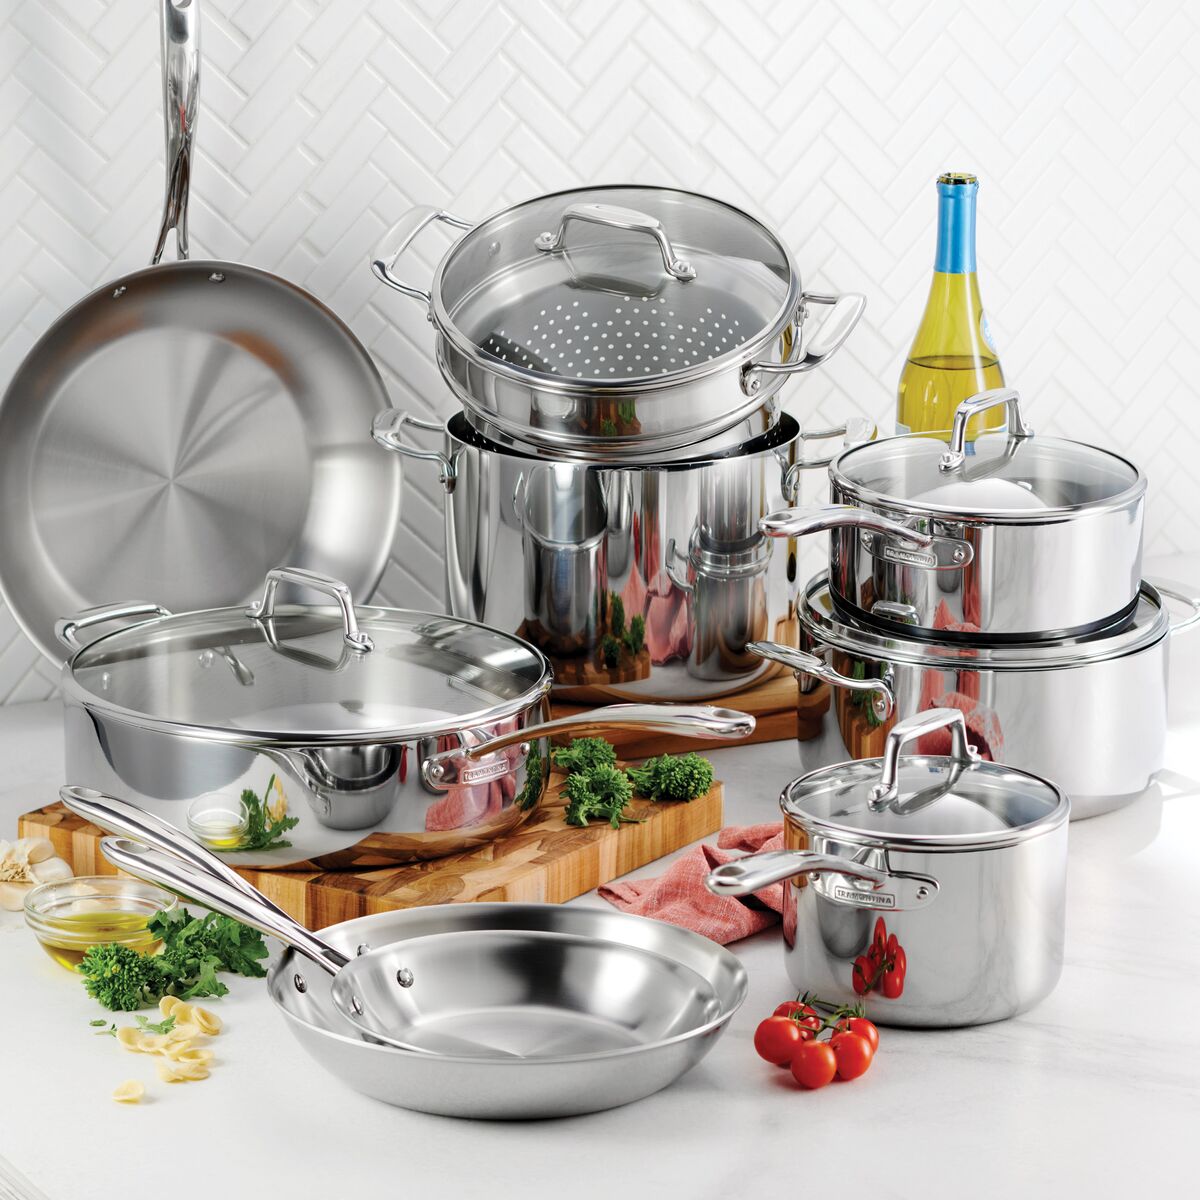 Tri-Ply Clad 14 Pc Stainless Steel Cookware Set with Glass Lids -  Tramontina US